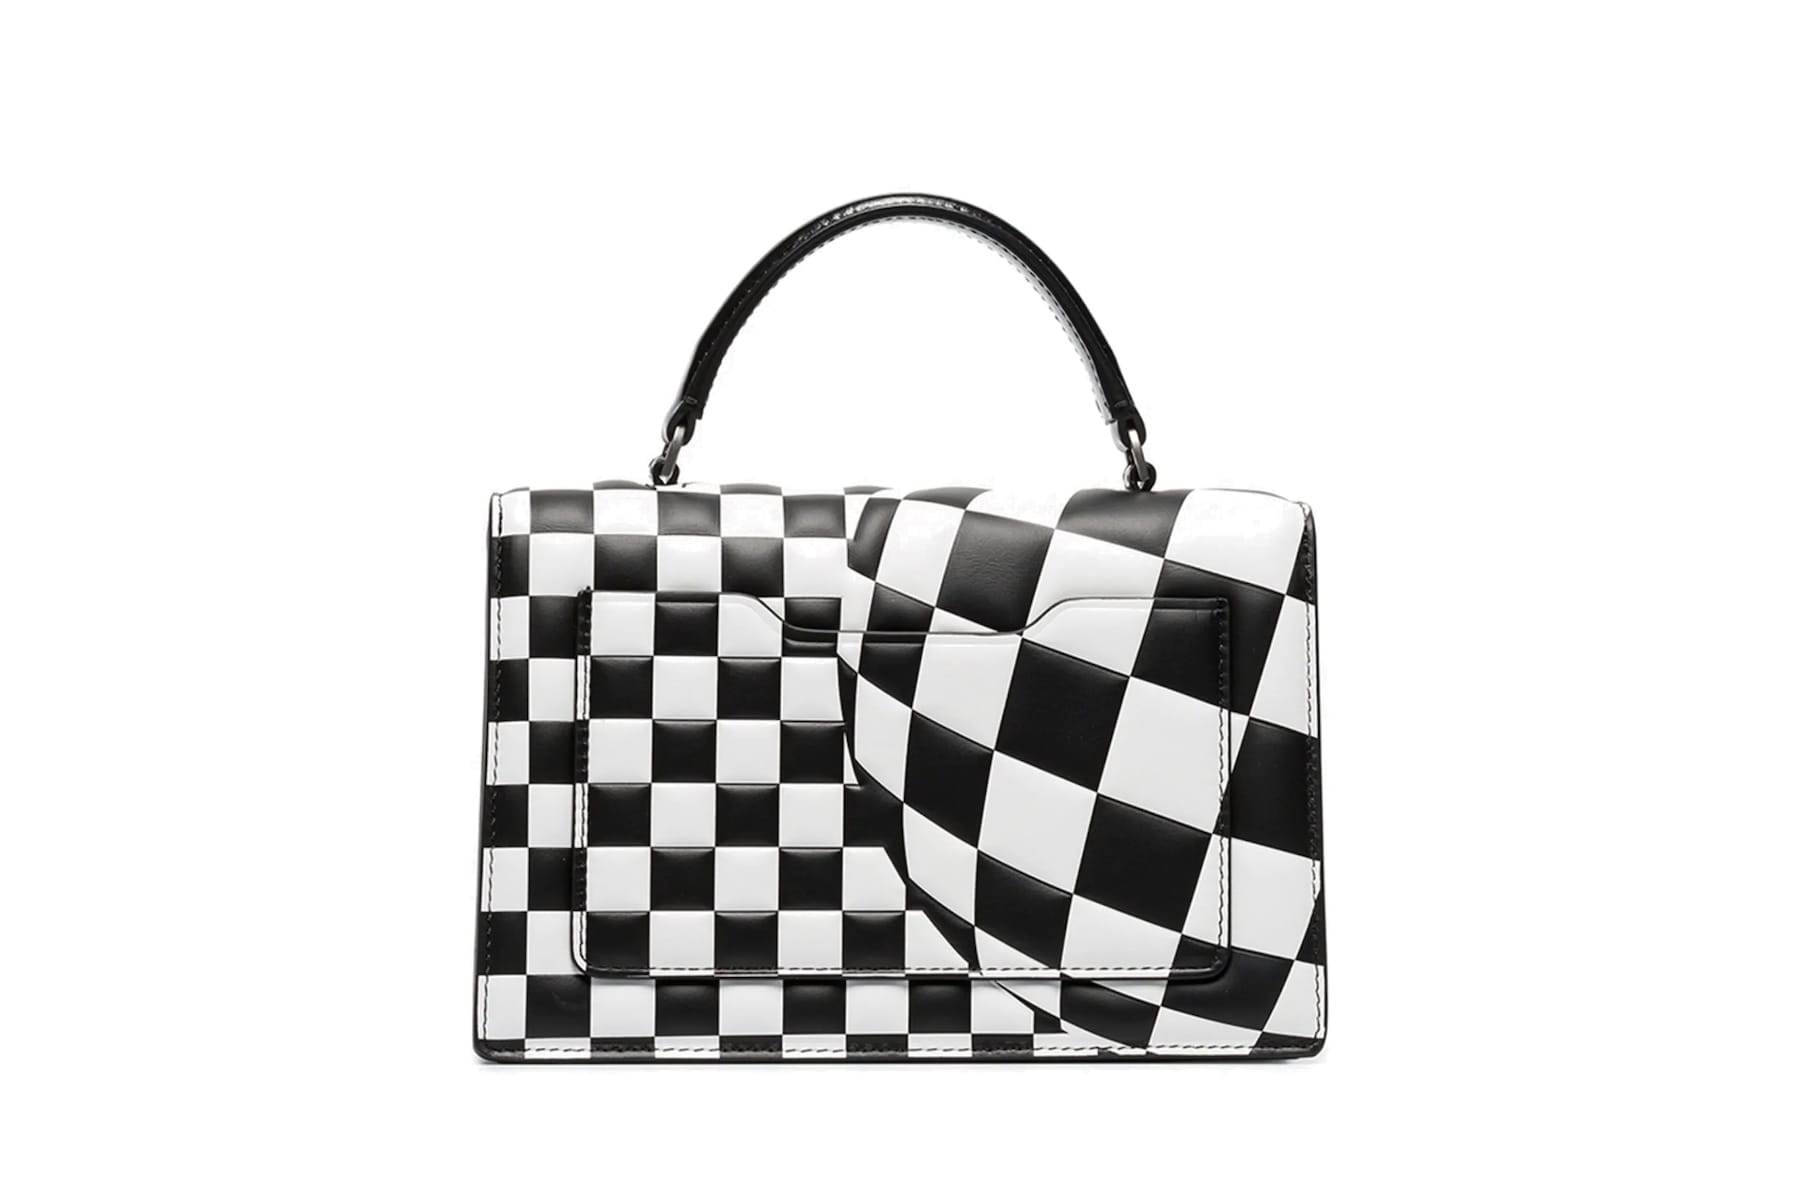 CoCopeaunt Women Shoulder Bag Large Capacity Fashion Transparent Handbag  Plaid Jelly Pvc Frosted Checkerboard Tote Bag Purse Bolso Mujer -  Walmart.com